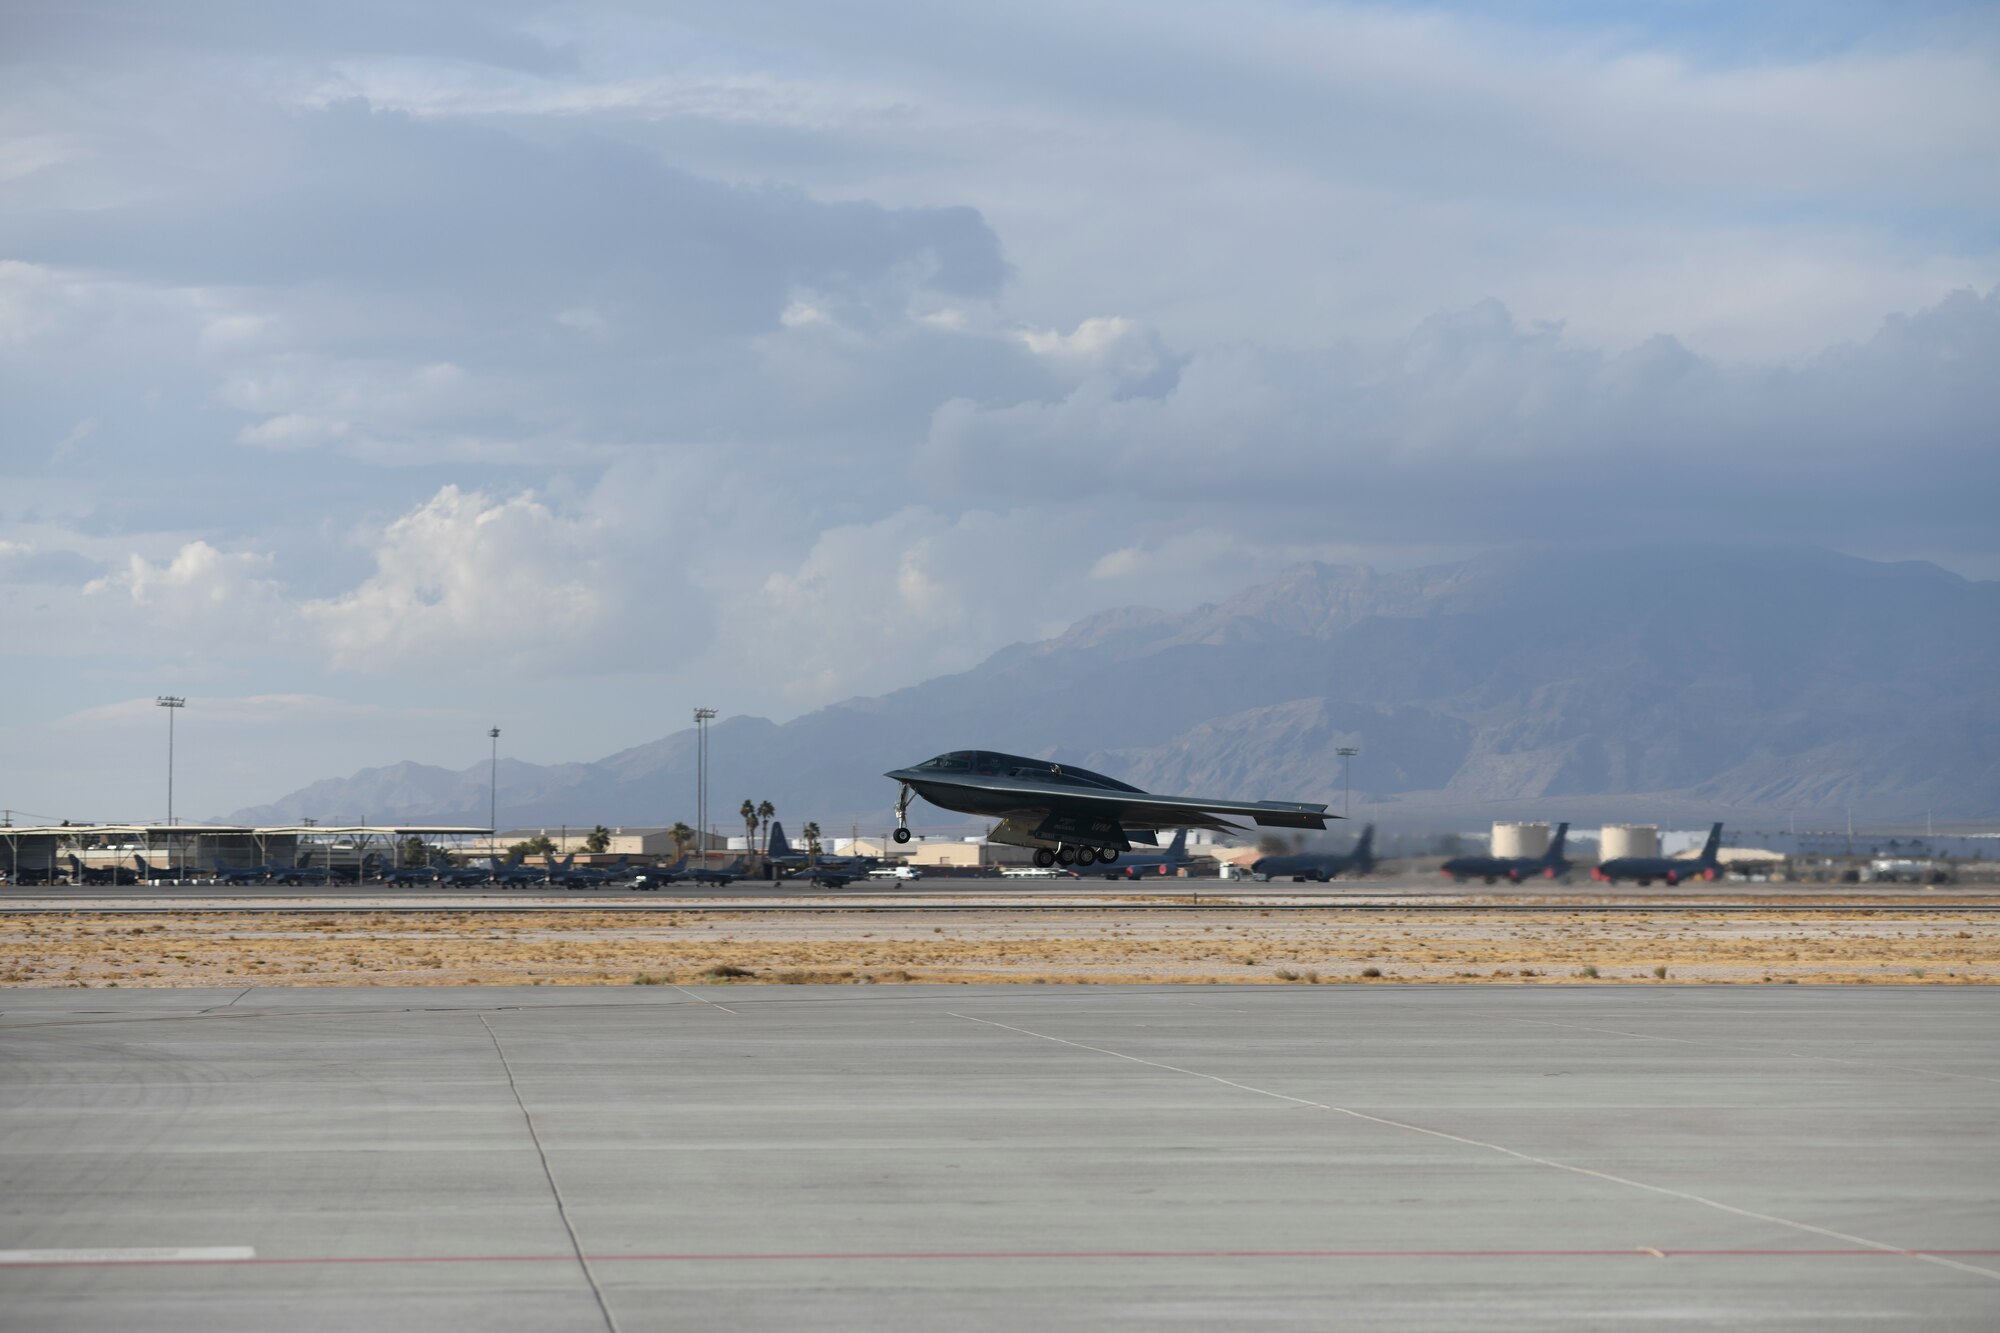 A B-2 Spirit Stealth Bomber lands on the runway for Red Flag 21-1, at Nellis Air Force Base, Nevada, Jan. 22, 2021. Red Flag 21-1 is a large force exercise that is the U.S. Air Force's premier air-to-air combat training exercise and provides aircrews the experience of multiple, intensive air combat sorties in the safety of a training environment. (U.S. Air Force photo by Staff Sgt. Sadie Colbert)